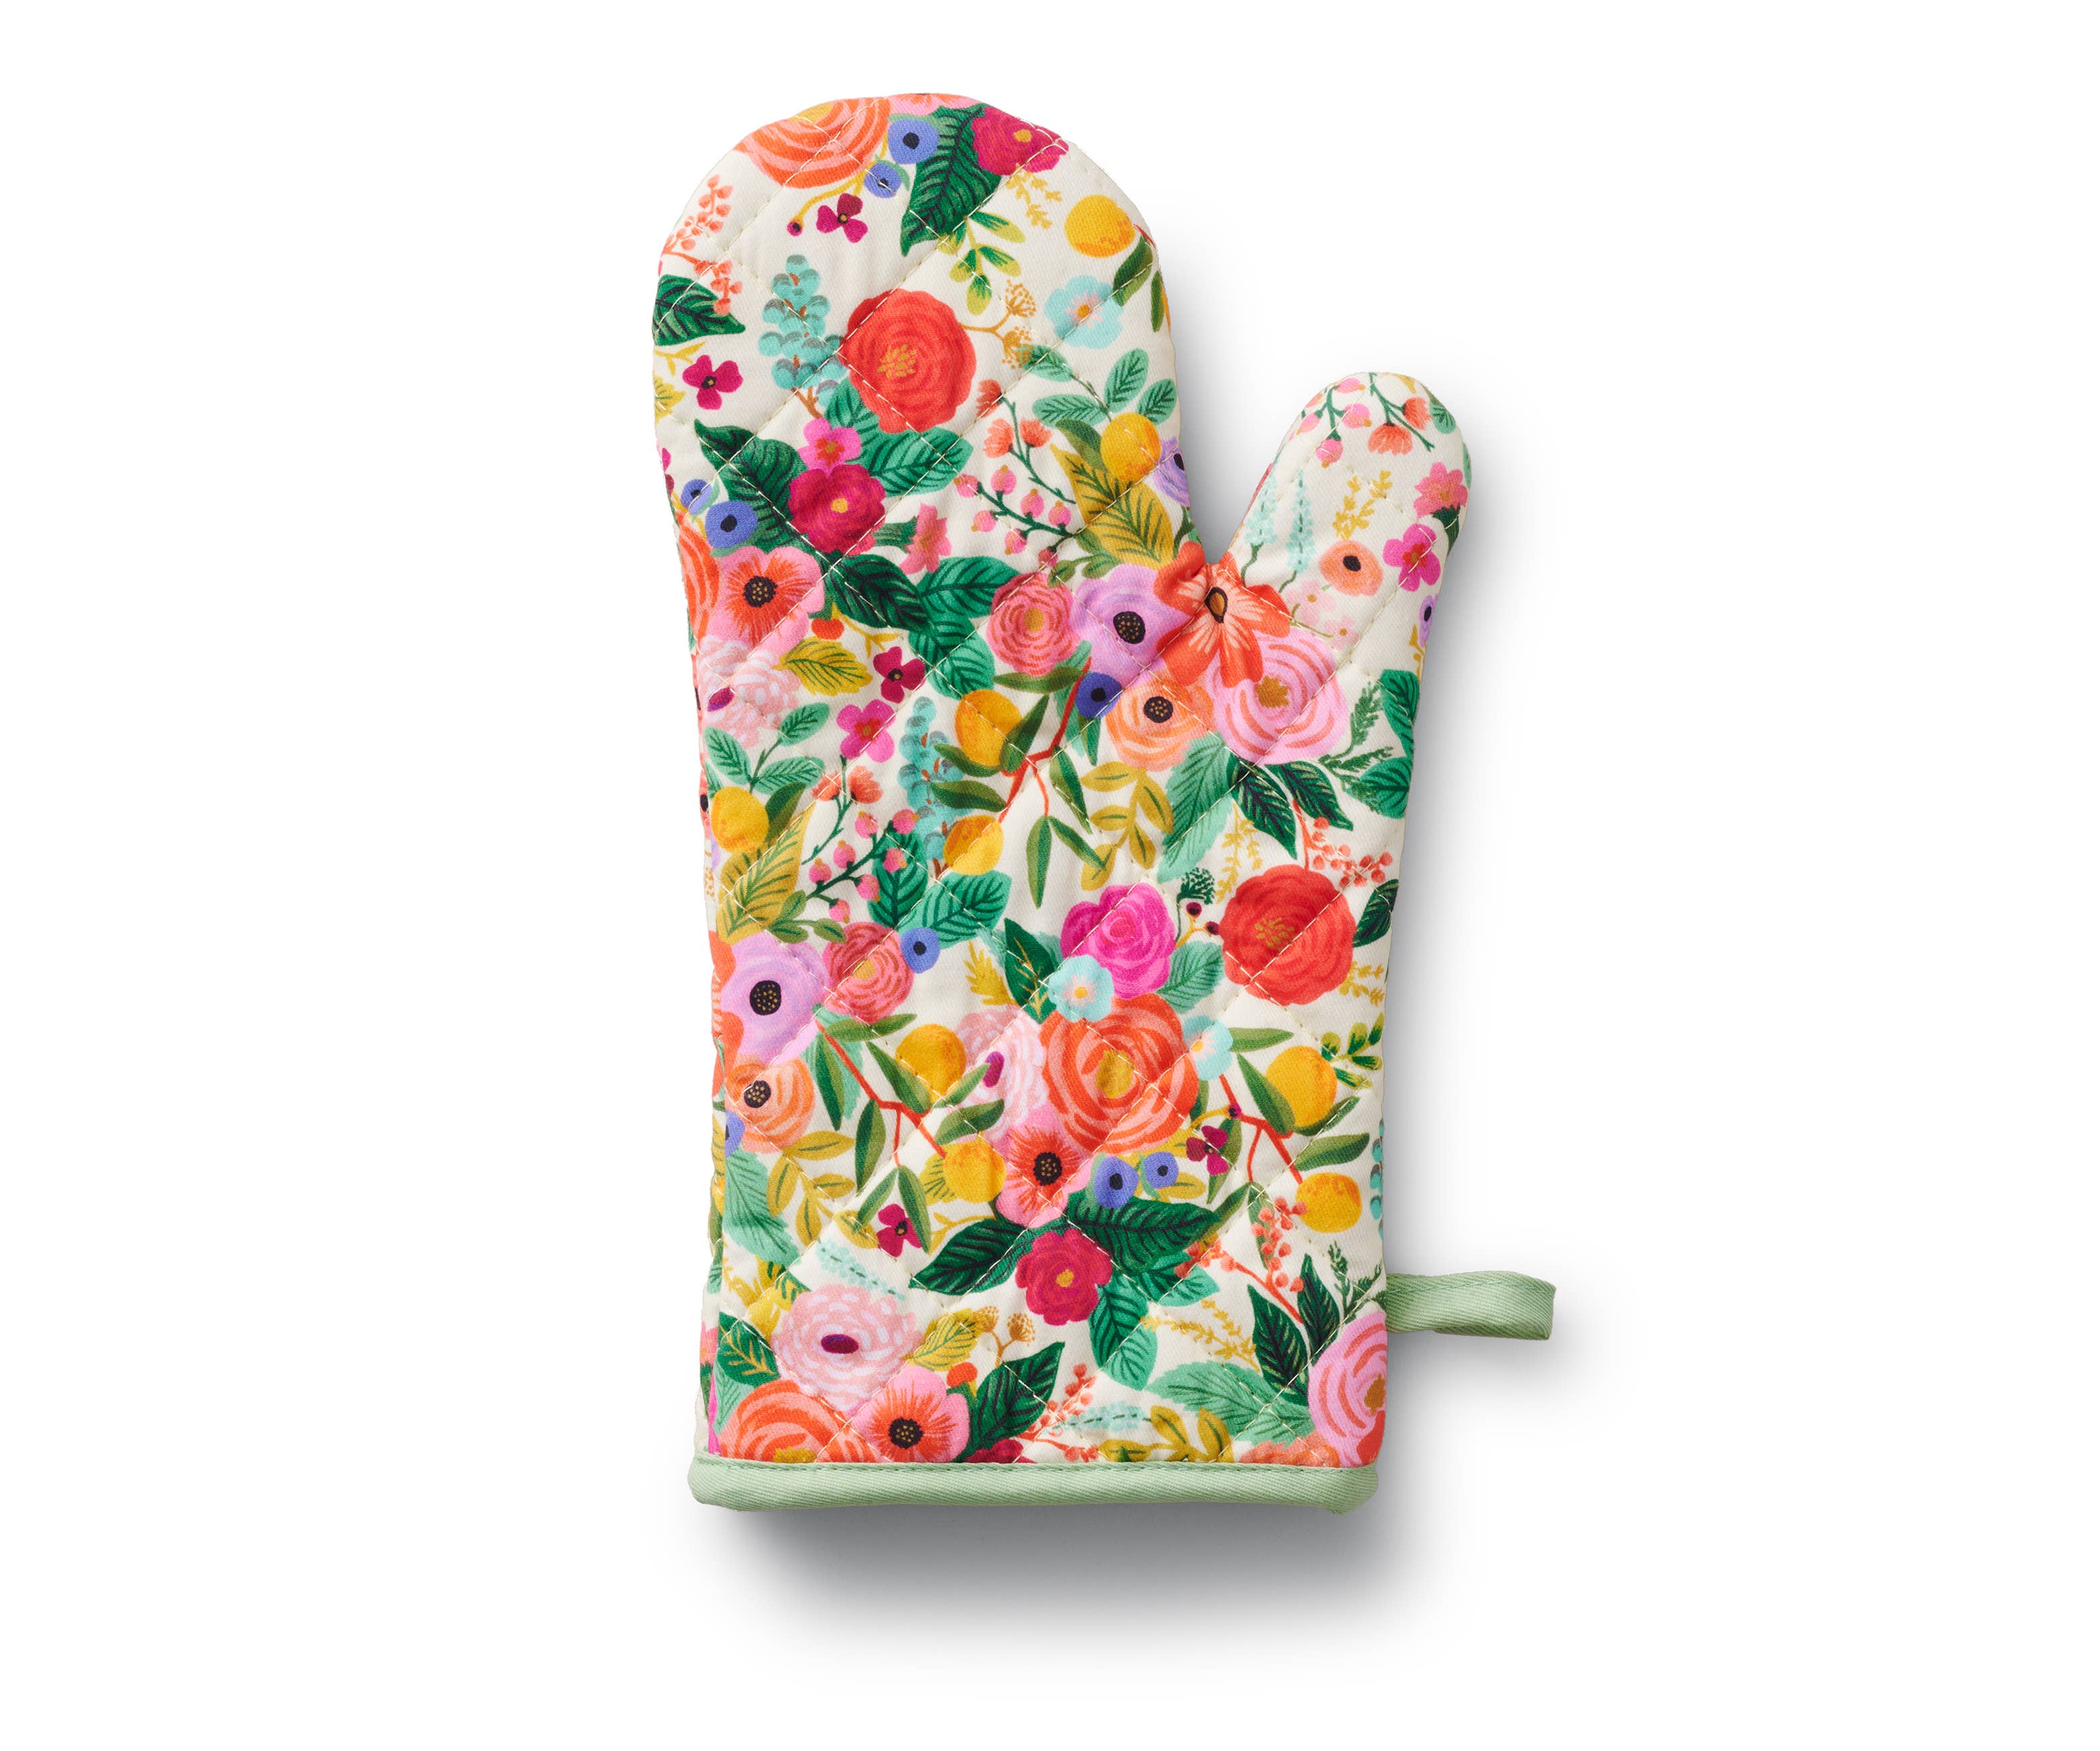 4 Pack Oven Mitts and Pot Holders Set, Heat Resistant Fabric Bake Pot Holders Gloves, Green Floral, Size: One Size